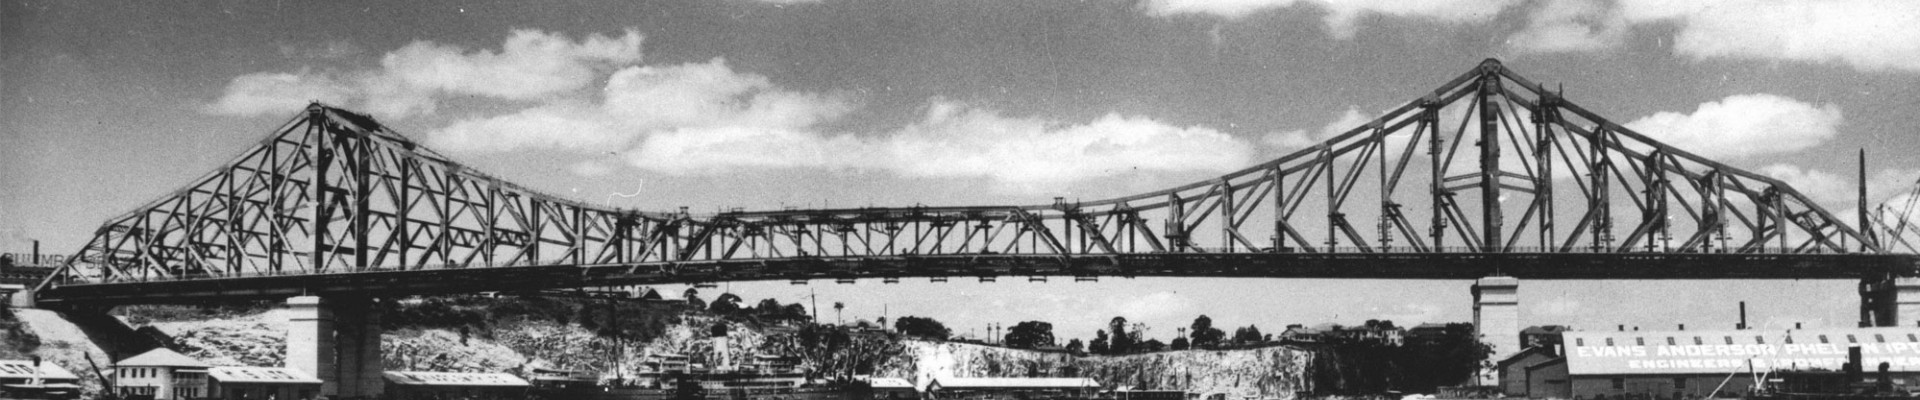 Brisbanes Story Bridge 1940 The 281 metre cantilever bridge was built between19351940 constructed by Evans Deakin - Hornibrook Pty Ltd The premises of Evans Anderson Phelan Pty Ltd Engineers at Kangaroo Point are visible on the right The New Farm cliffs can be seen in the background The bridge connected Fortitude Valley and the southside suburbs It is heritage listed and now carries 30 million cars per year 16 bridges cross the river but the Story Bridge remains the grandfather of them all